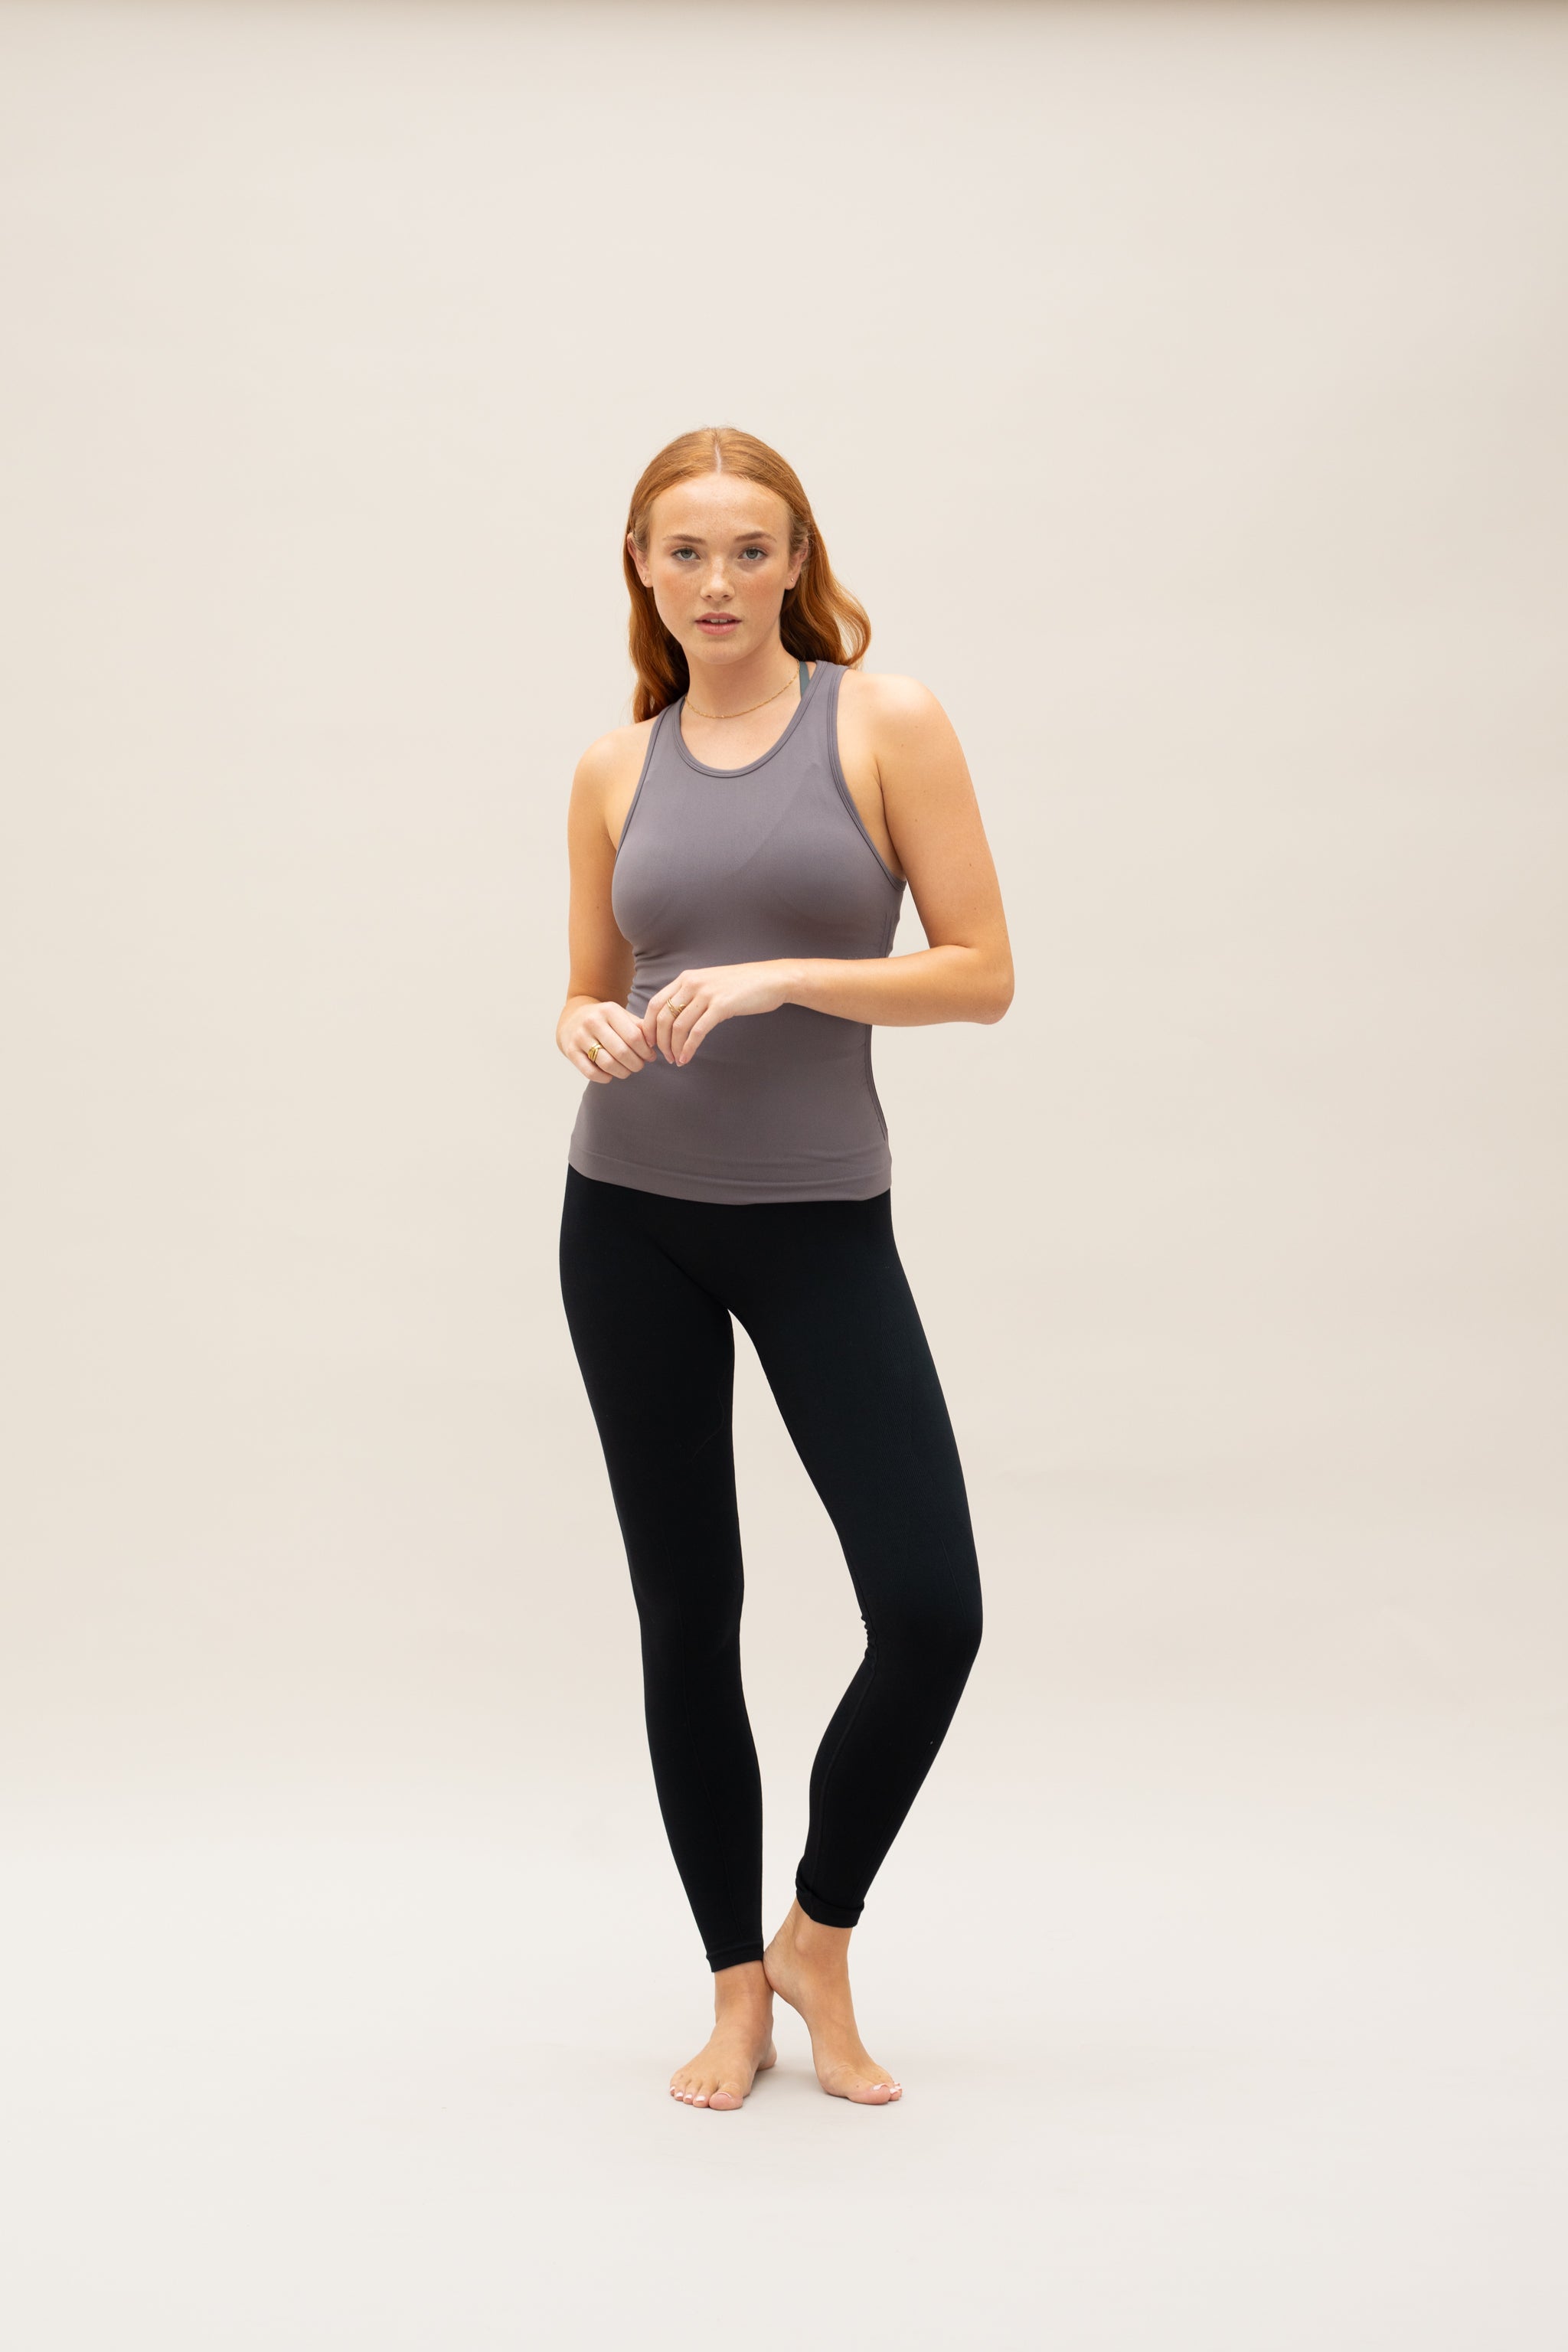 Taupe grey bown seamless recycled moisture wicking sleeveless tank top with side ruching for yoga, pilates, gym, cycling, running and exercise by sustainable activewear brand Jilla Active